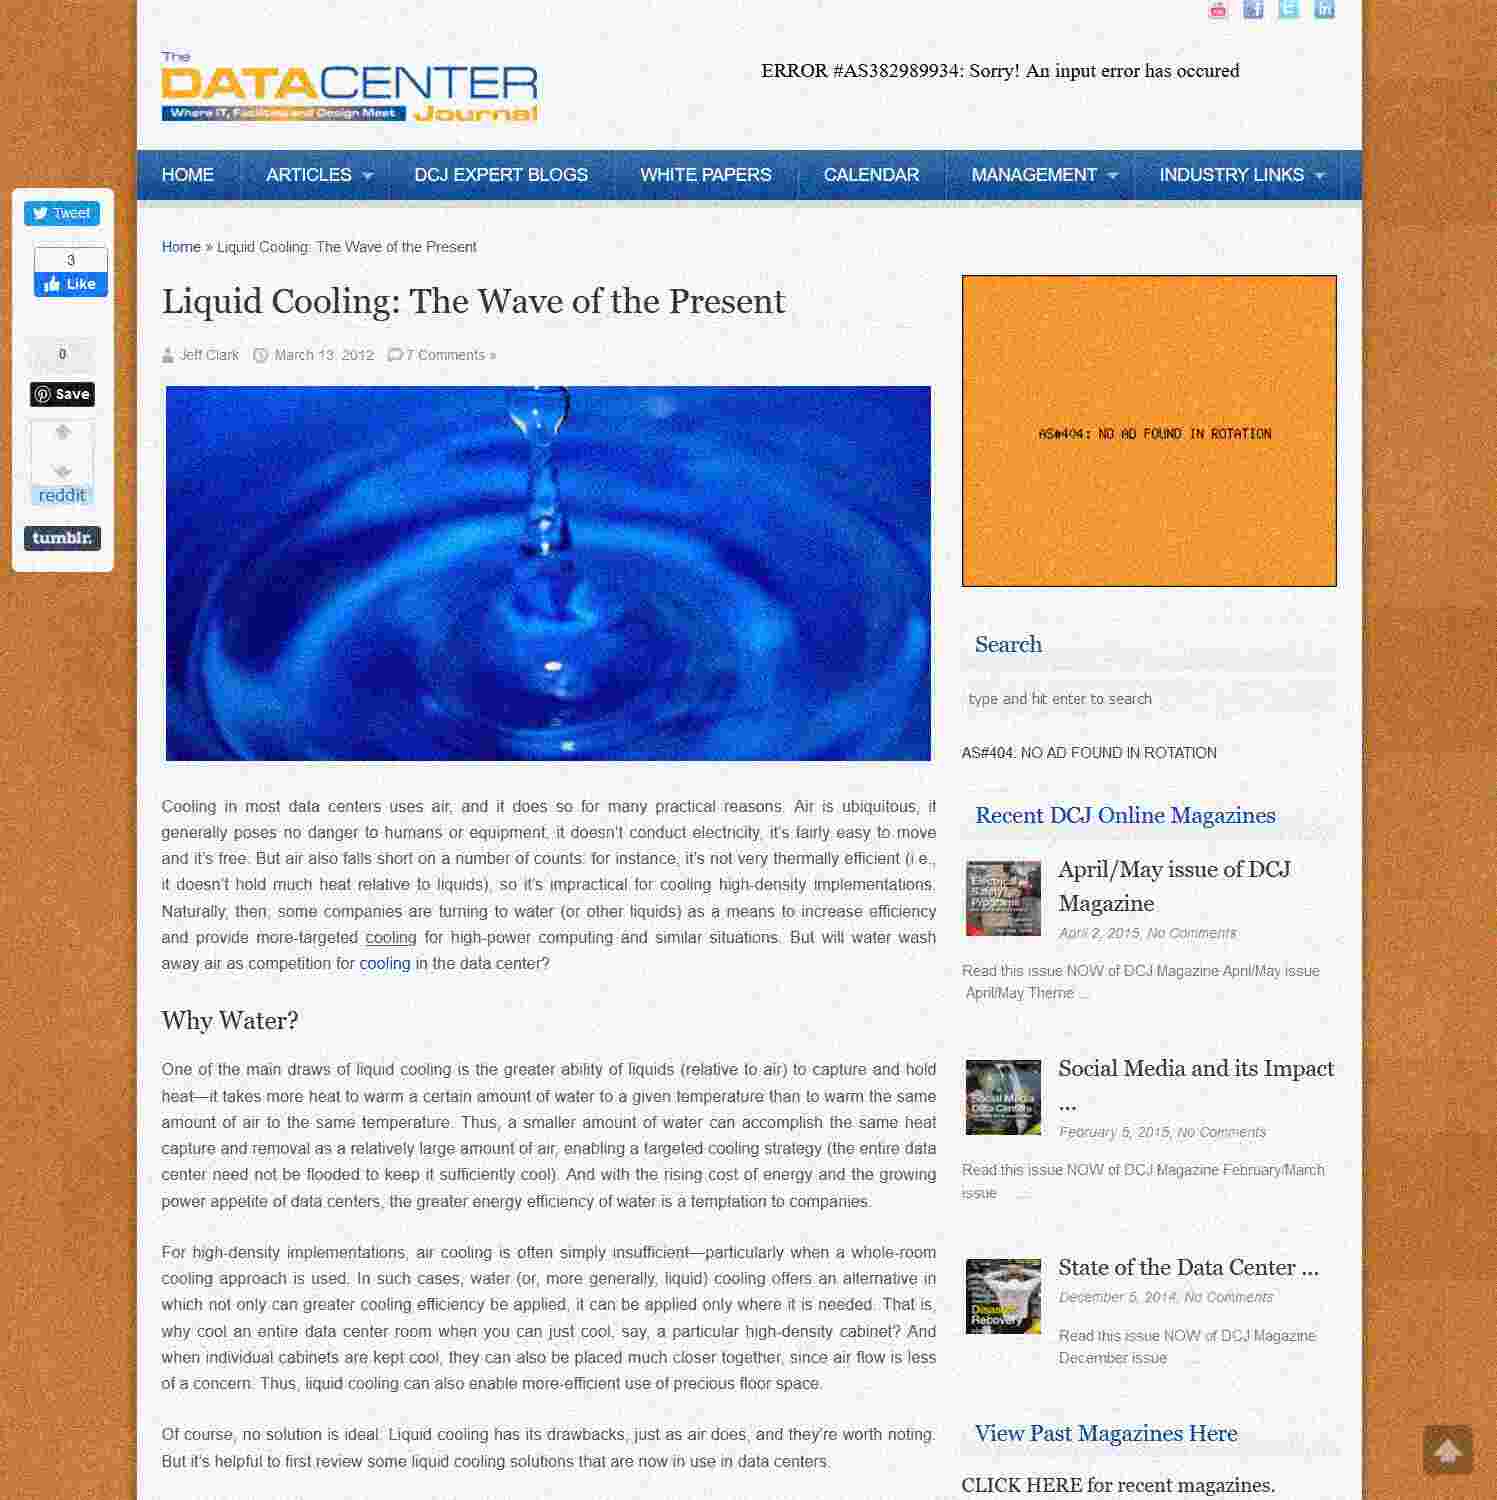 Illustration of Liquid Cooling: The Wave of the Present